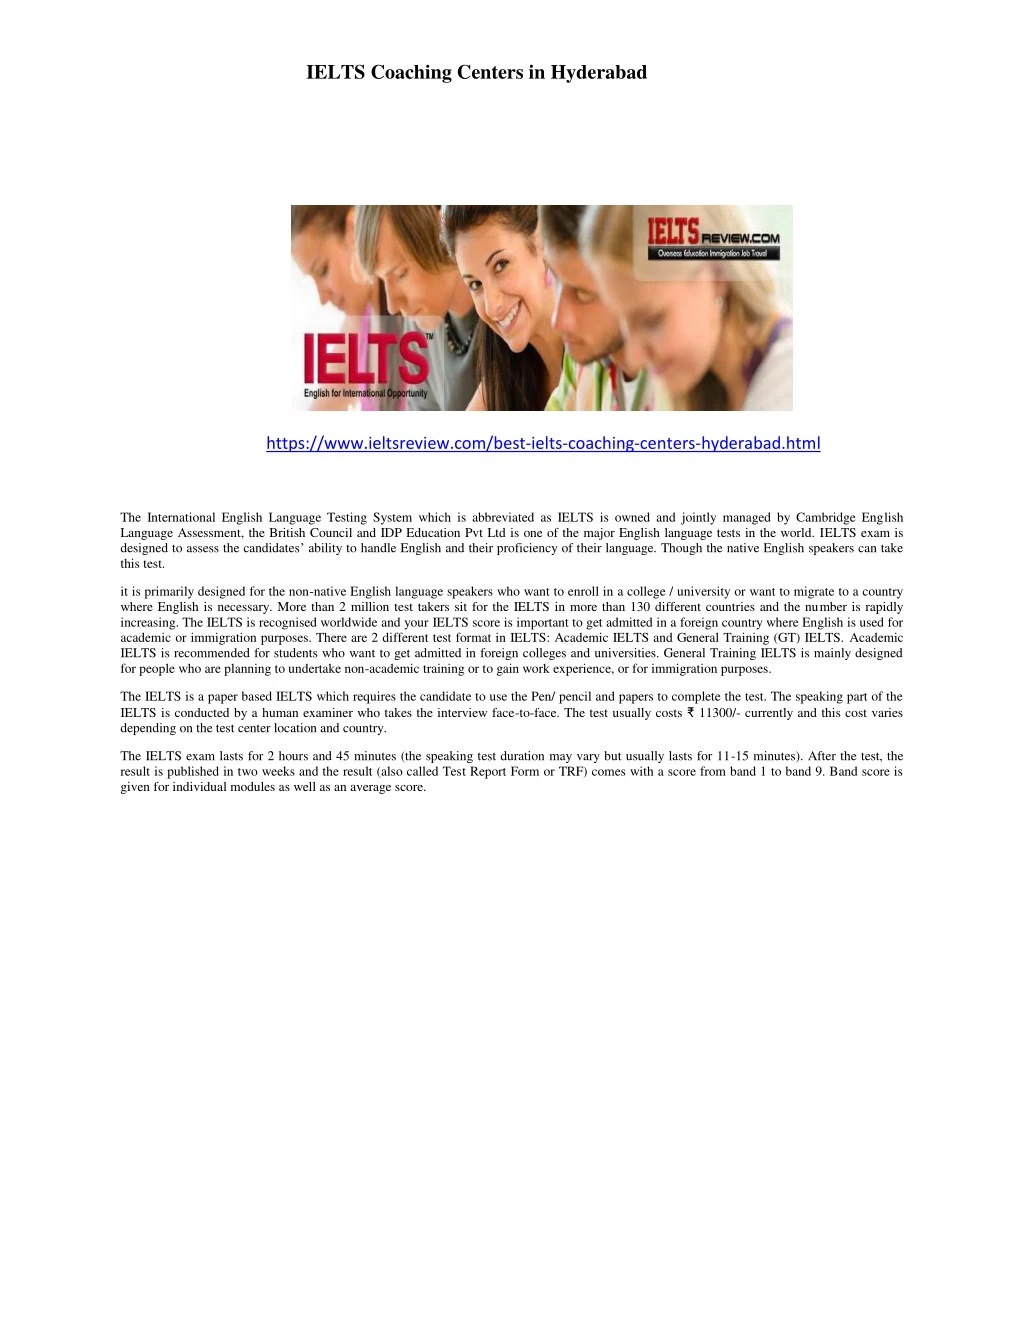 ielts coaching centers in hyderabad